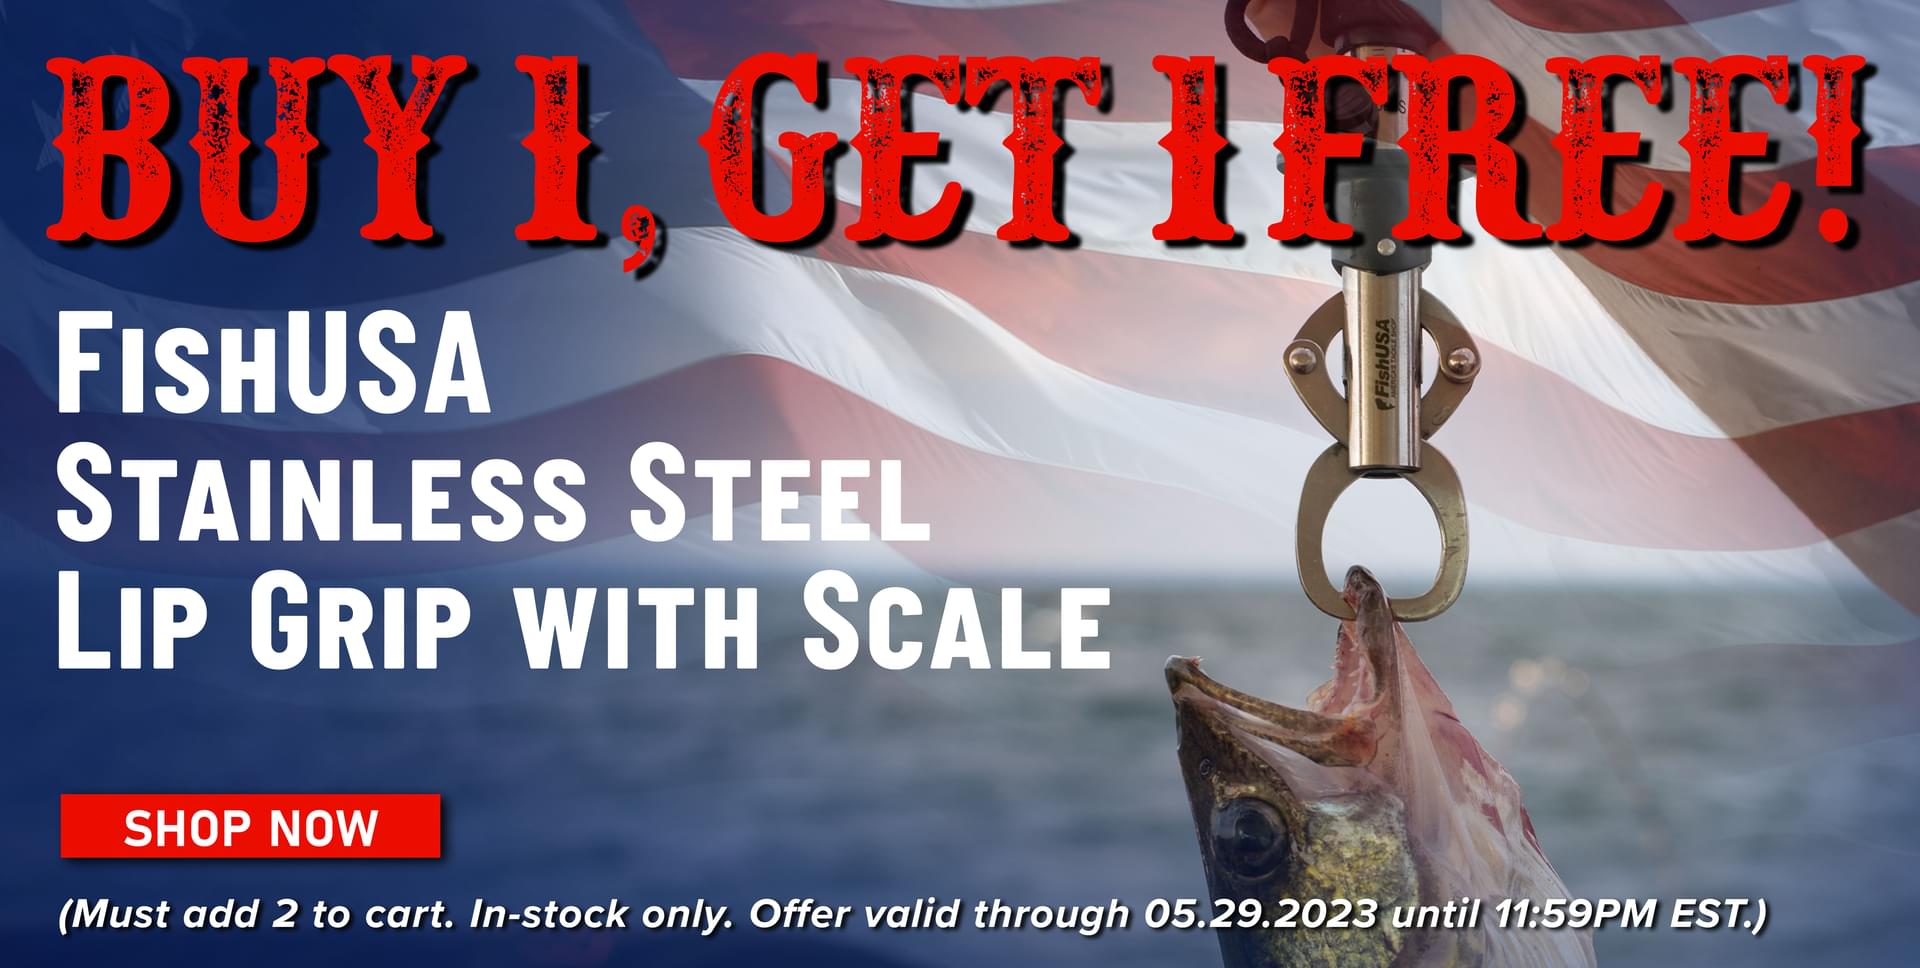 Buy 1, Get 1 Free! FishUSA Stainless Steel Lip Grip with Scale Shop Now (Must add 2 to cart. In-stock only. Offer valid 05.29.2023 until 11:59PM EST.)